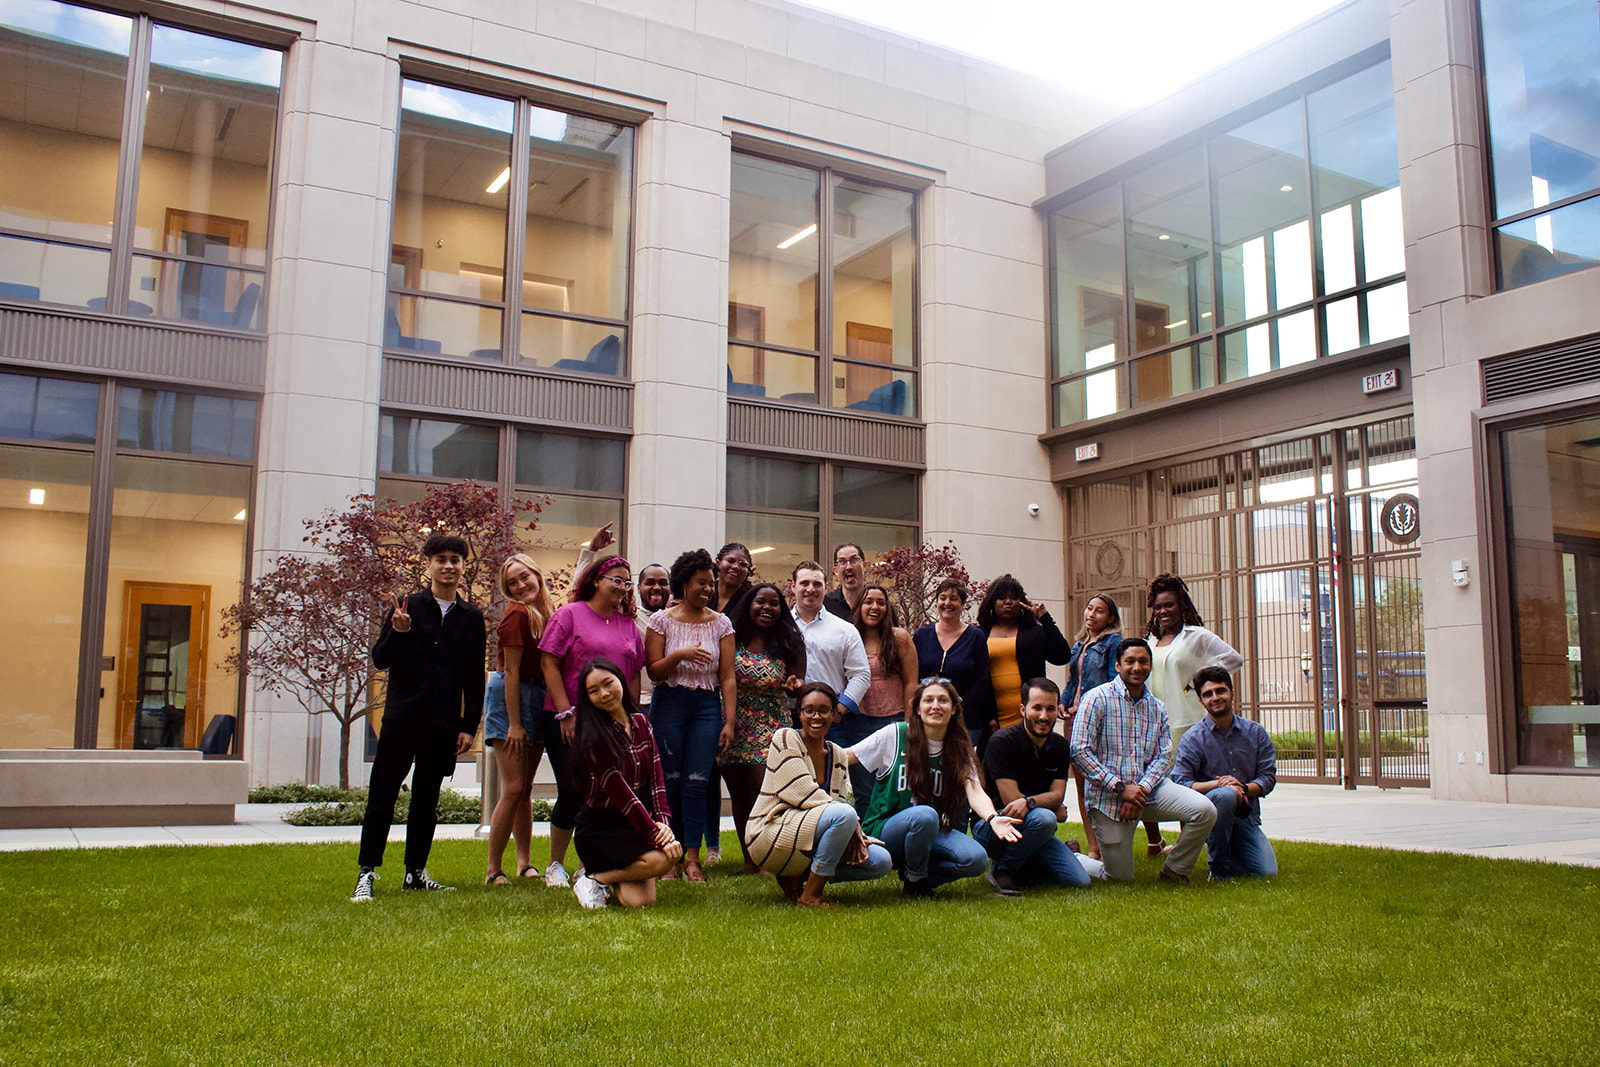 Image shows the group of students and staff standing and kneeling on the grass in the campus courtyard.